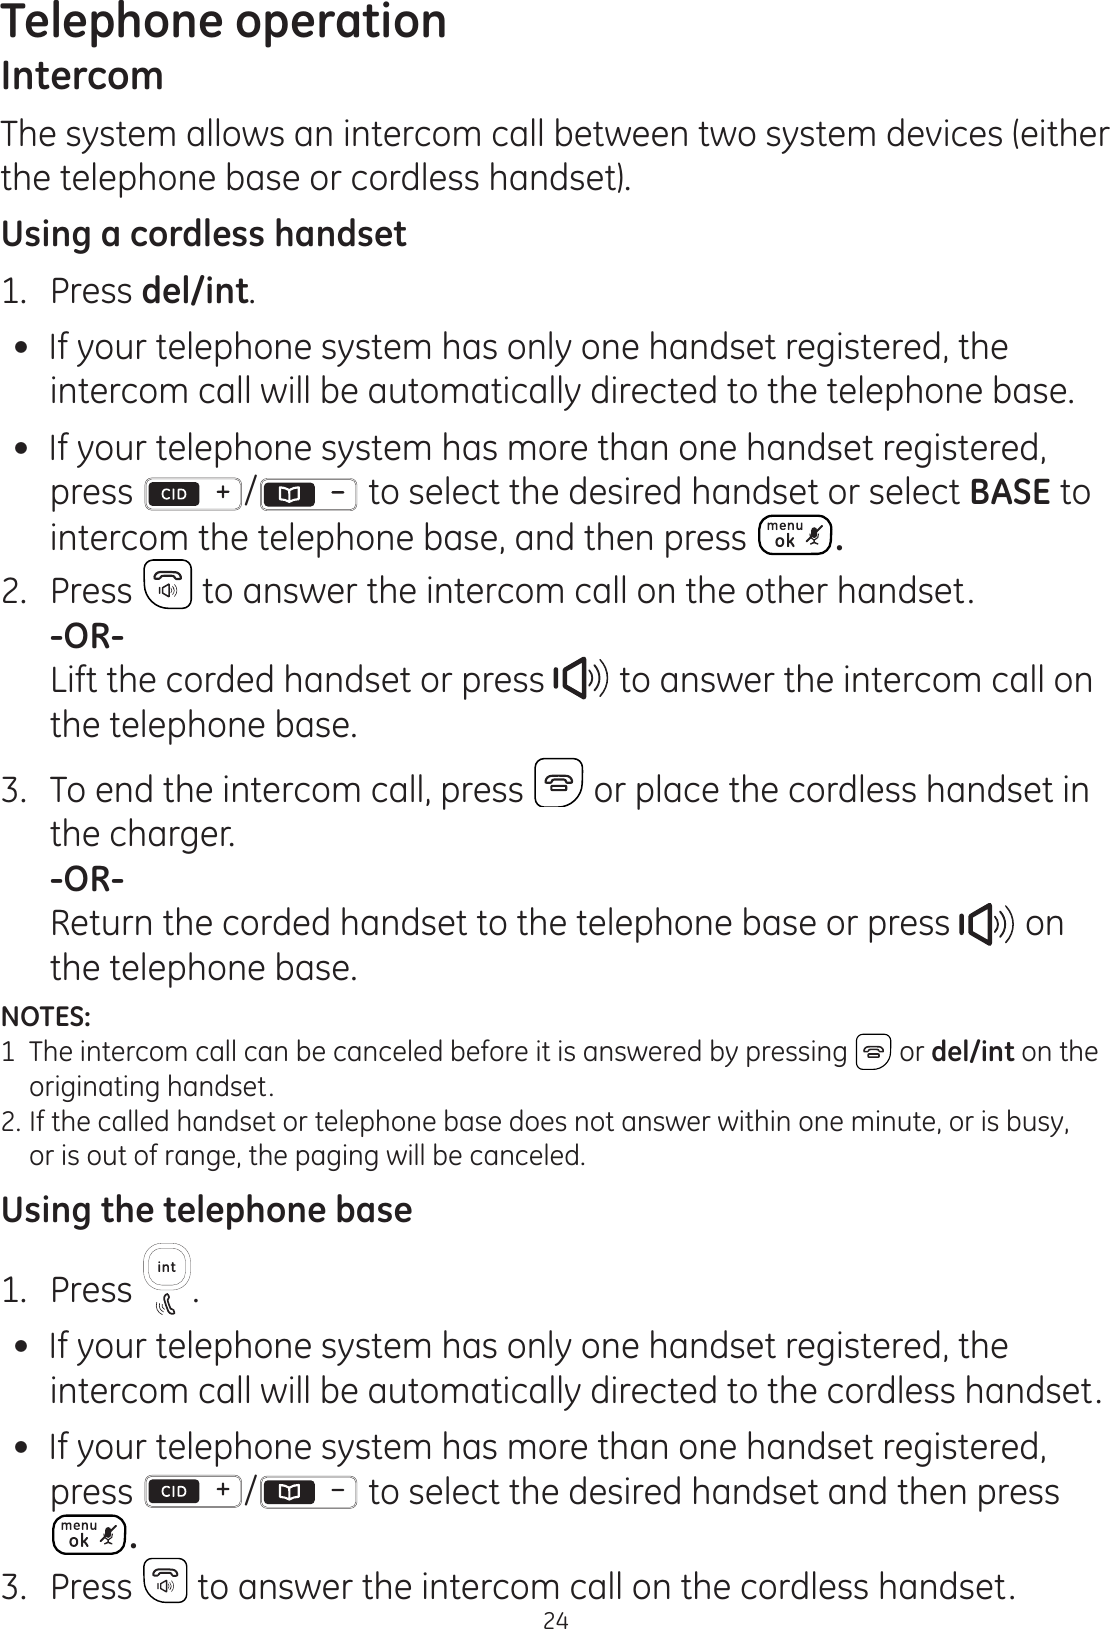 Telephone operation24IntercomThe system allows an intercom call between two system devices (either the telephone base or cordless handset).Using a cordless handset1.  Press del/int. If your telephone system has only one handset registered, the intercom call will be automatically directed to the telephone base. If your telephone system has more than one handset registered, press /  to select the desired handset or select BASE to intercom the telephone base, and then press  .2.  Press   to answer the intercom call on the other handset. -OR-  Lift the corded handset or press   to answer the intercom call on the telephone base.3.  To end the intercom call, press   or place the cordless handset in the charger.  -OR-  Return the corded handset to the telephone base or press   on the telephone base. NOTES: 1  The intercom call can be canceled before it is answered by pressing   or del/int on the    originating handset.2.  If the called handset or telephone base does not answer within one minute, or is busy,    or is out of range, the paging will be canceled.Using the telephone base1.  Press  . If your telephone system has only one handset registered, the intercom call will be automatically directed to the cordless handset. If your telephone system has more than one handset registered, press  /  to select the desired handset and then press .3.  Press   to answer the intercom call on the cordless handset.